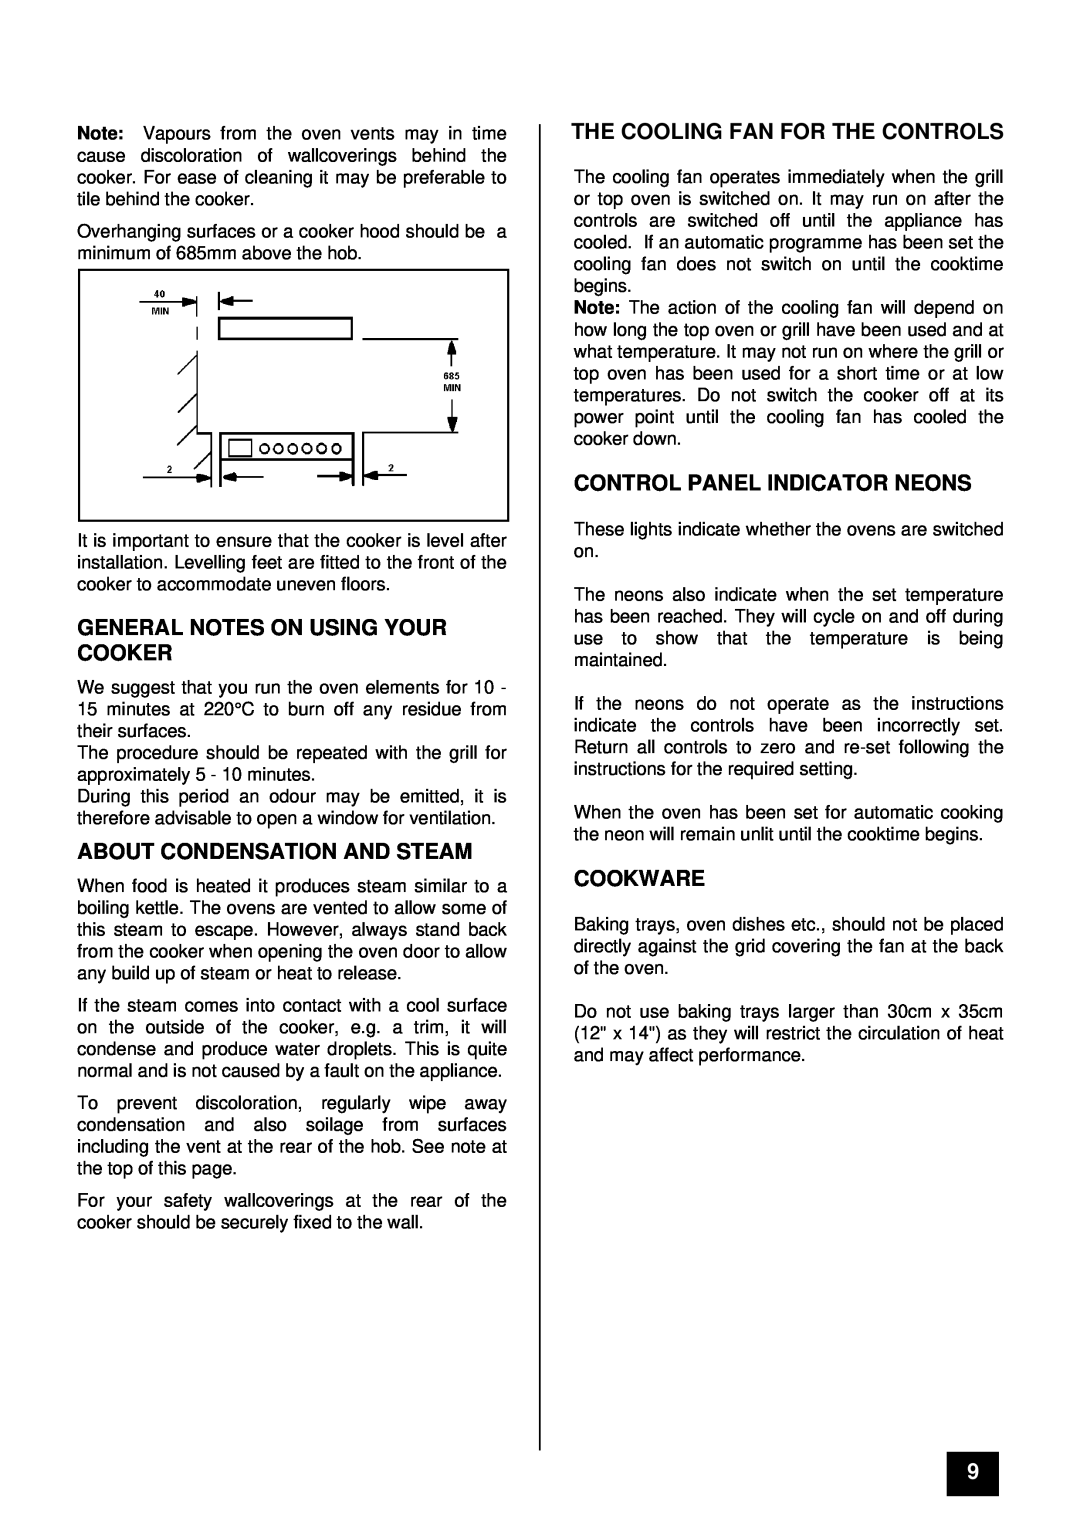 Tricity Bendix SIE 530 General Notes On Using Your Cooker, About Condensation And Steam, The Cooling Fan For The Controls 